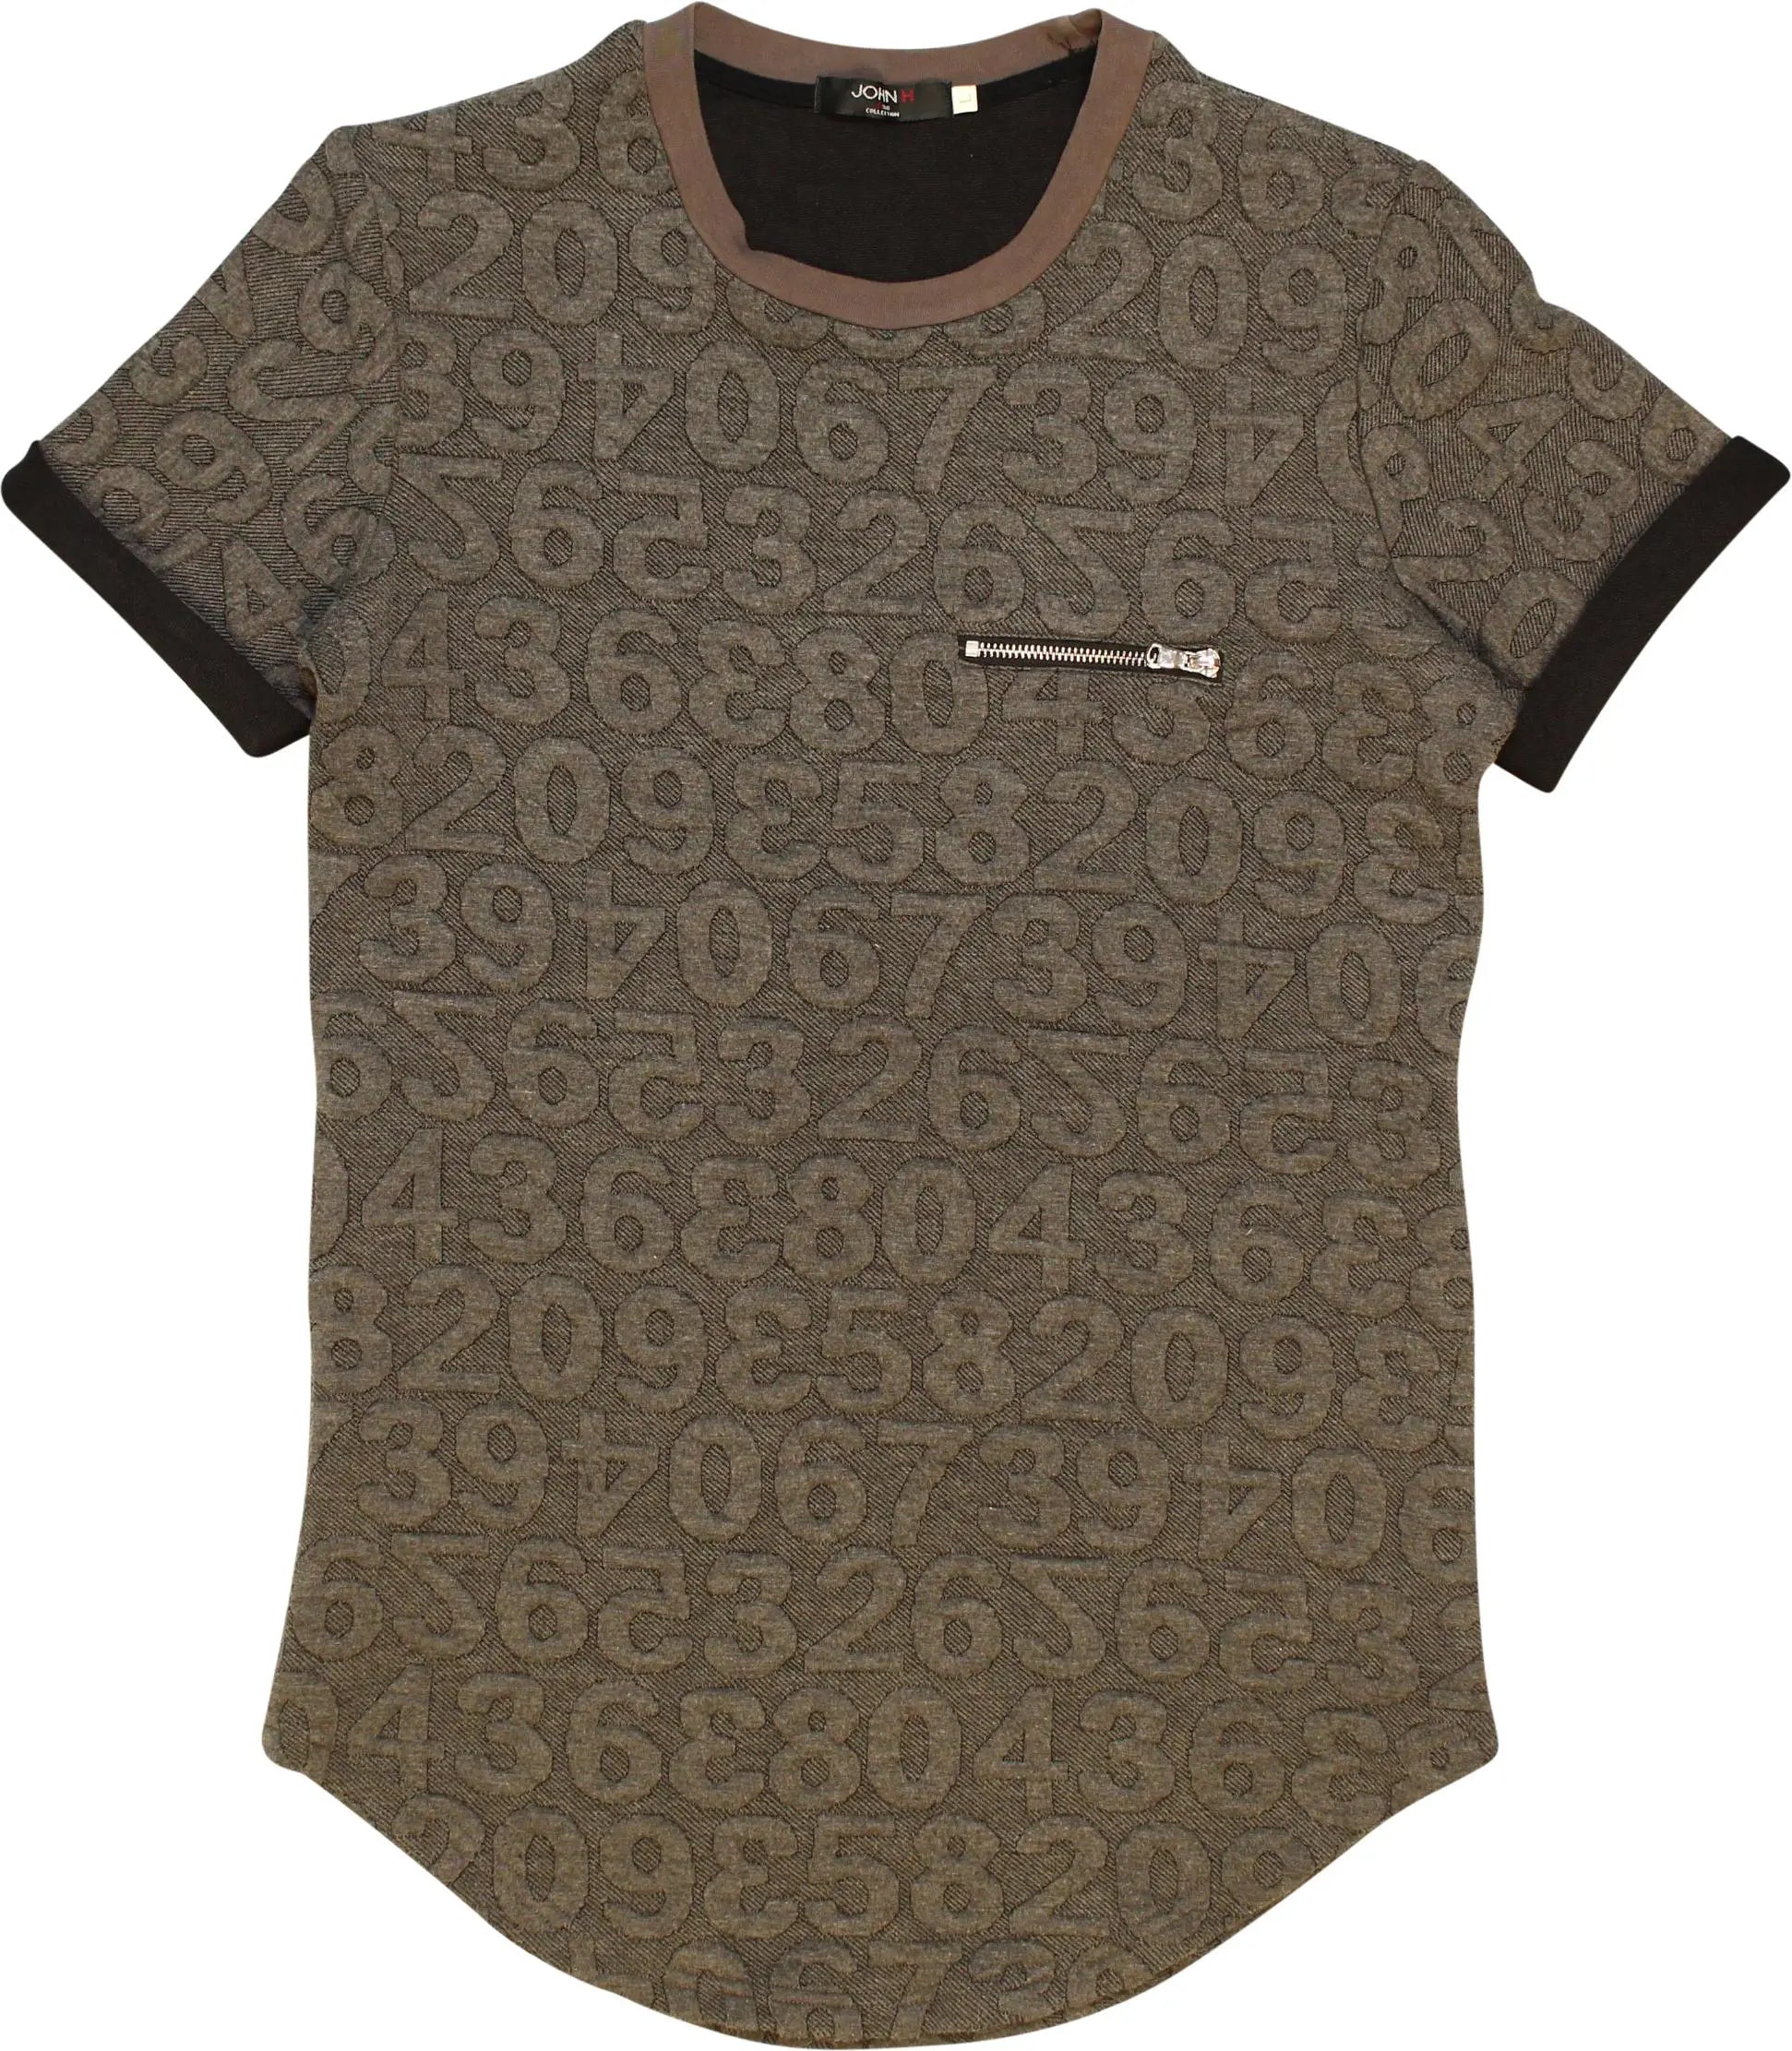 John H - Numbers T-shirt- ThriftTale.com - Vintage and second handclothing